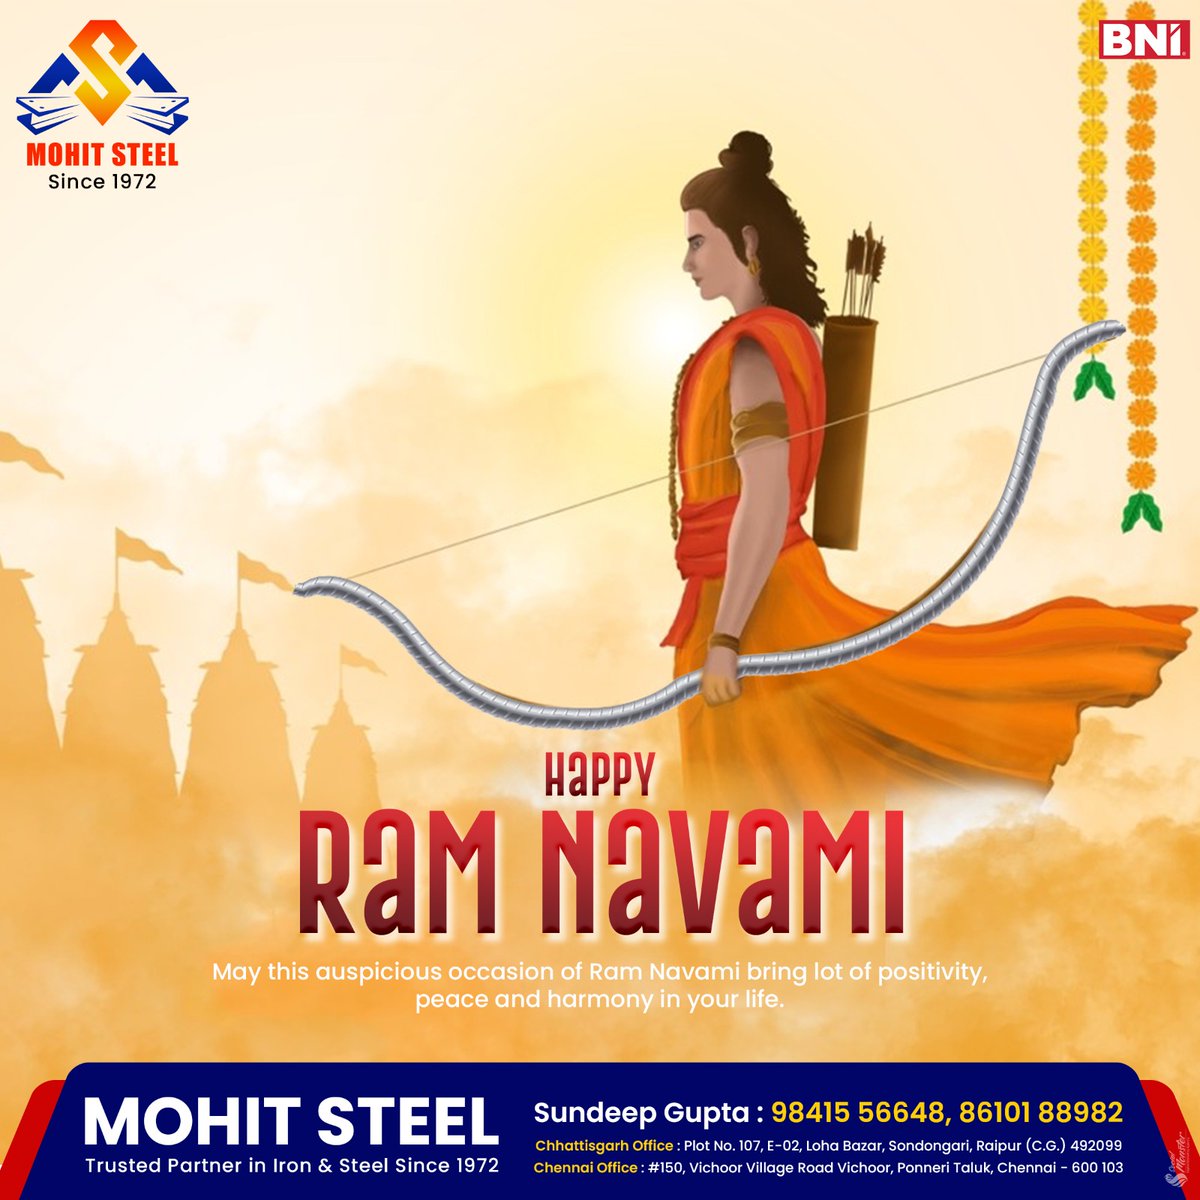 Wishing you a blissful Ram Navami filled with divine blessings and joy! 📷📷
.
.
.
#tmtbars #steel #construction #strong #tmt #strength #steelbars #srmmarketing #constructionmaterials #civilengineer #engineers #builders #strongtmt #structuralengineering #strongbars